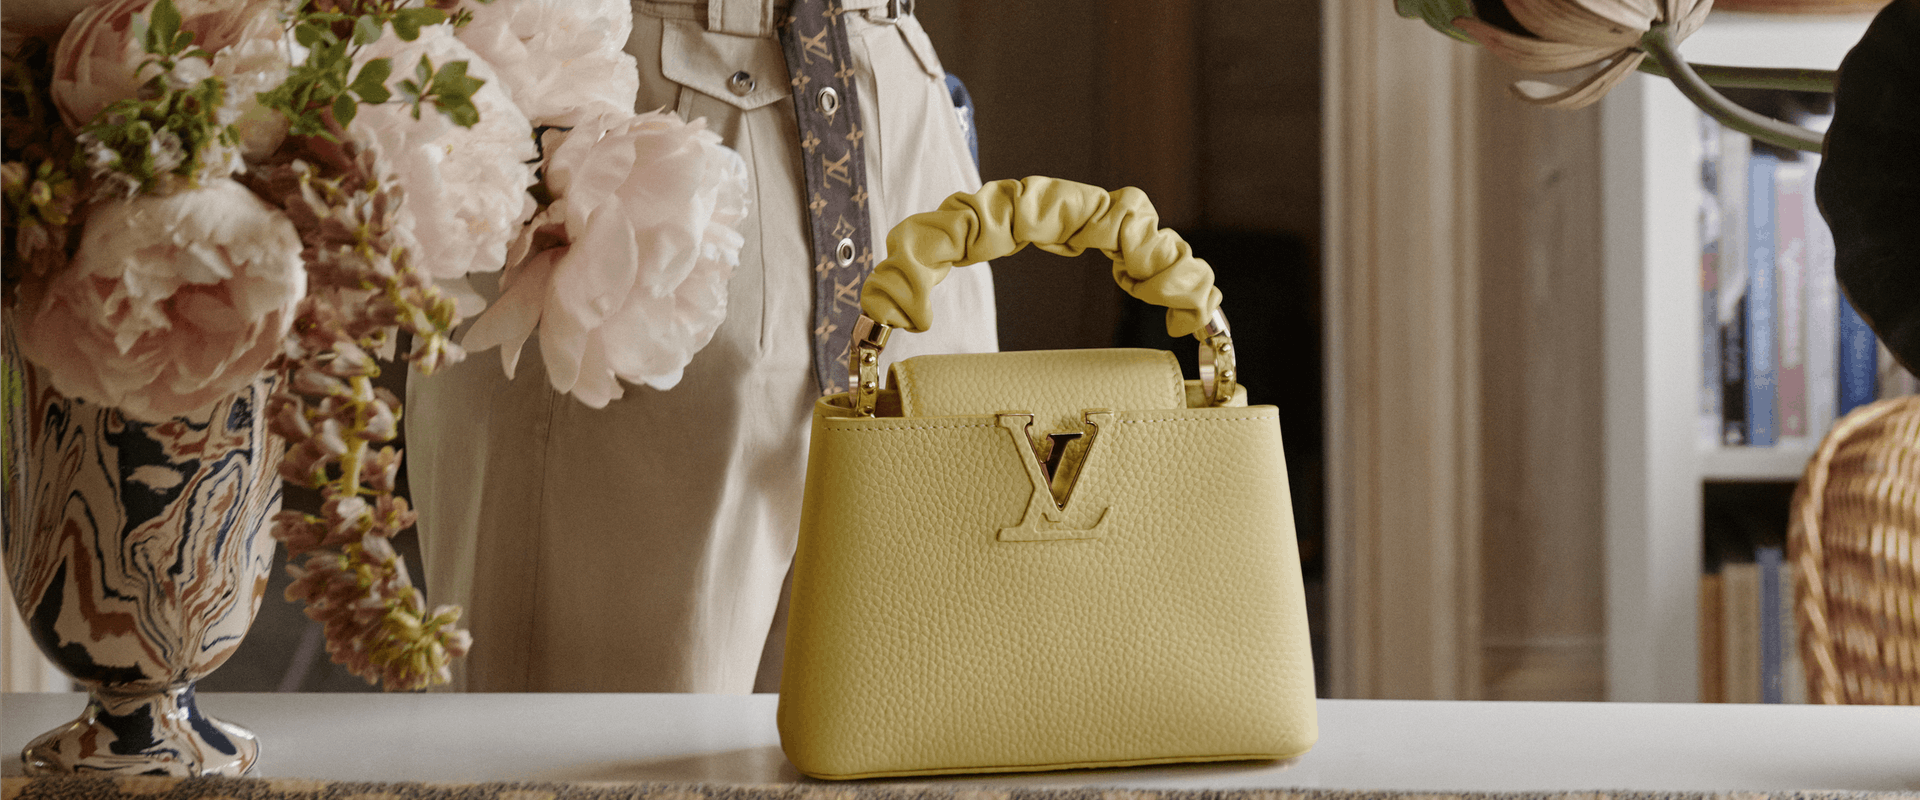 Experience Luxury Cottagecore with Louis Vuitton's Capucines Bag